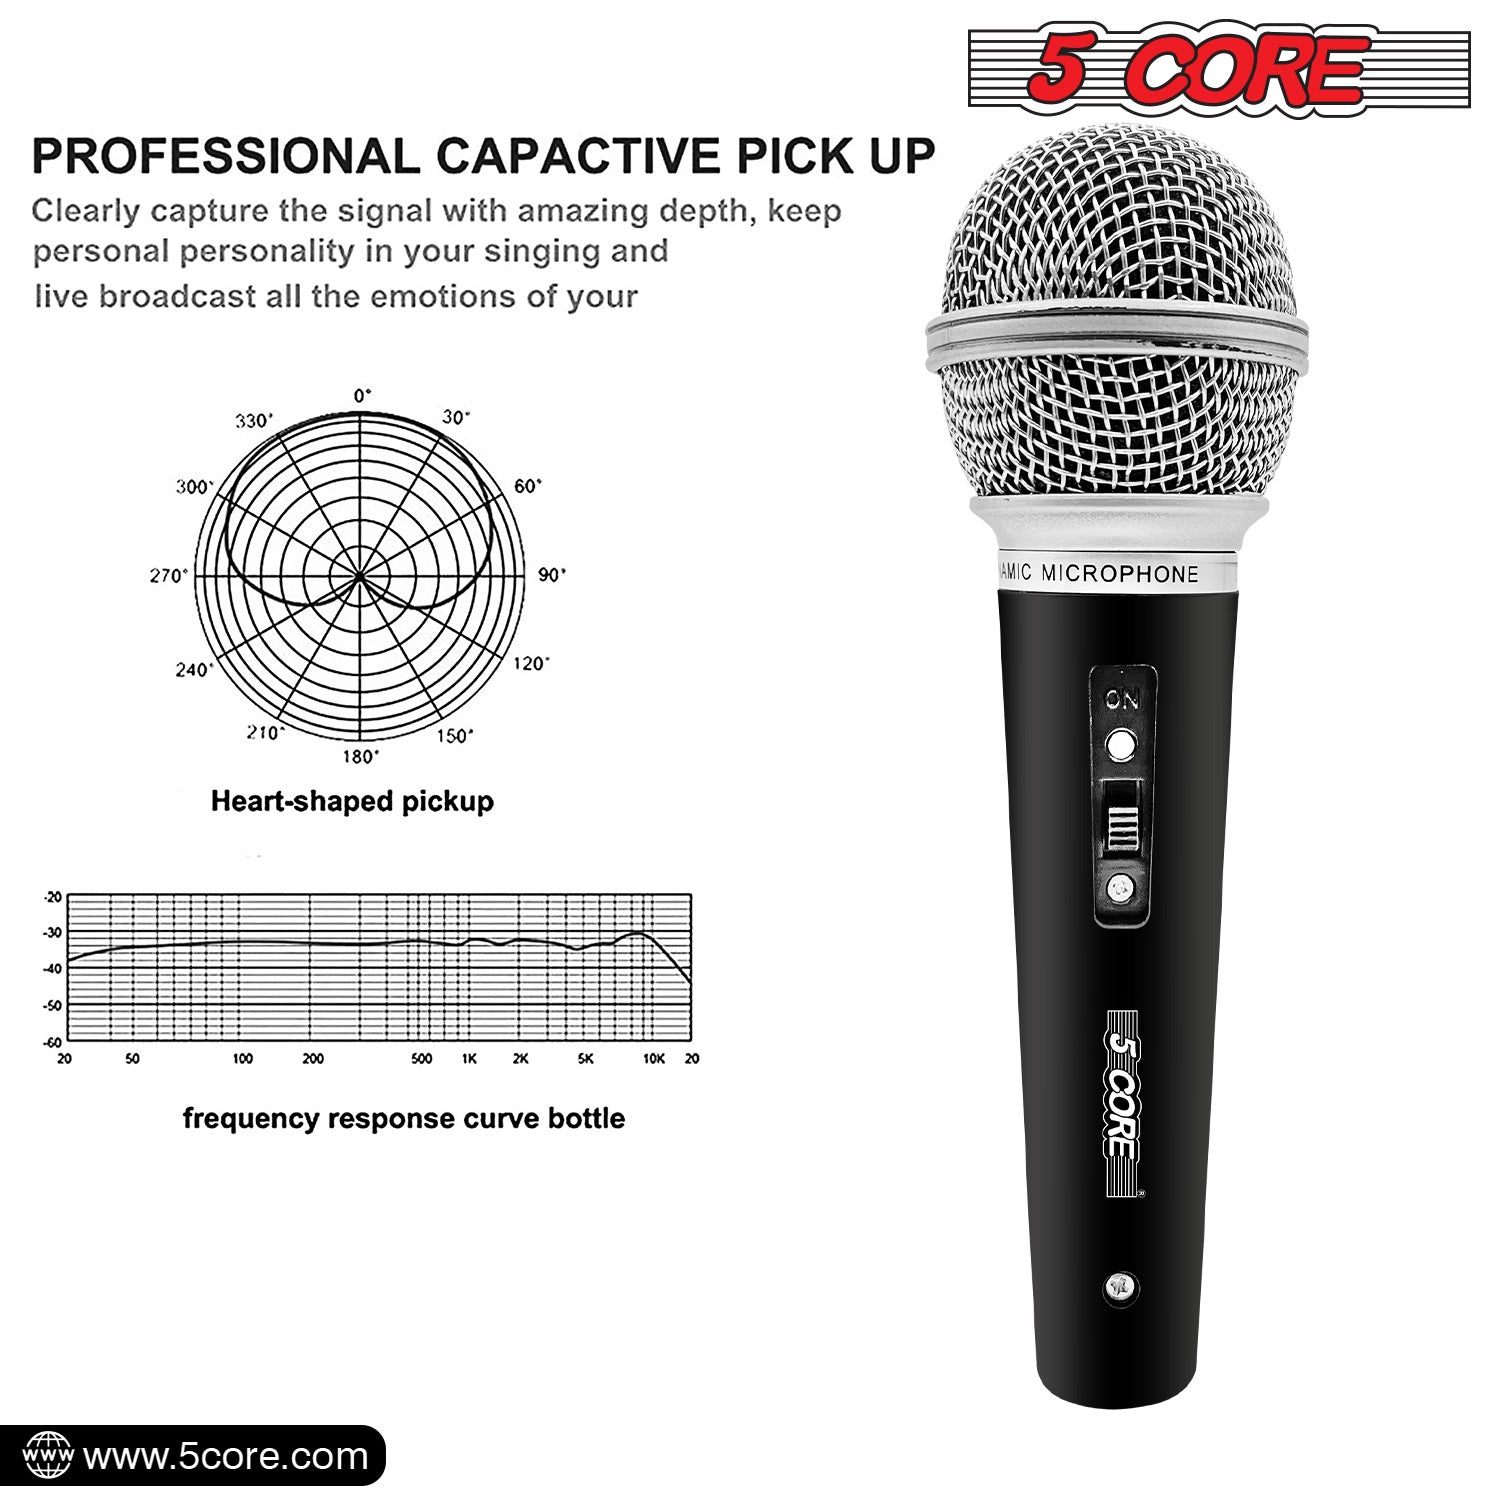 5 Core Karaoke Microphone Dynamic Vocal Handheld Mic Cardioid Unidirectional Microfono w On and Off Switch Includes XLR Audio Cable for Singing, Public Speaking & Parties -PM 58